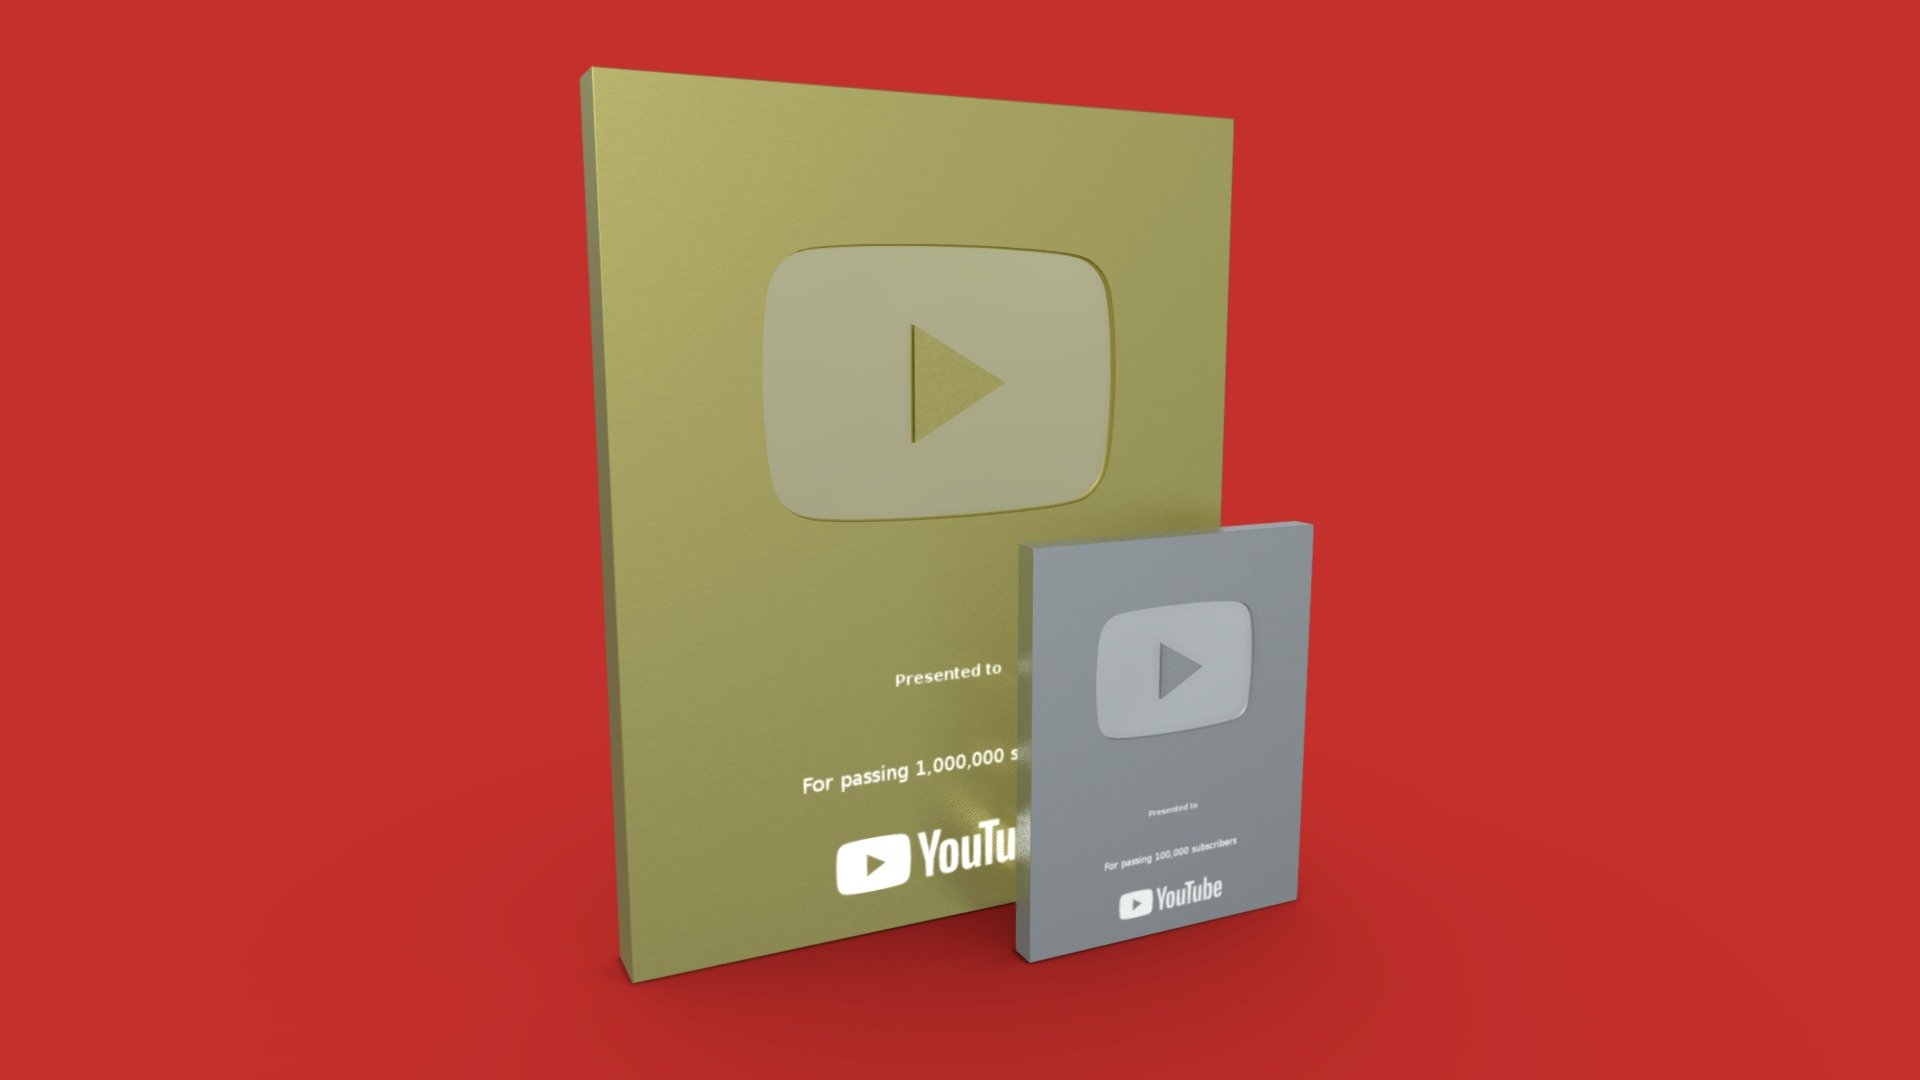 YouTube Play Buttons Buy Royalty Free D Model By Unconid C Sketchfab Store